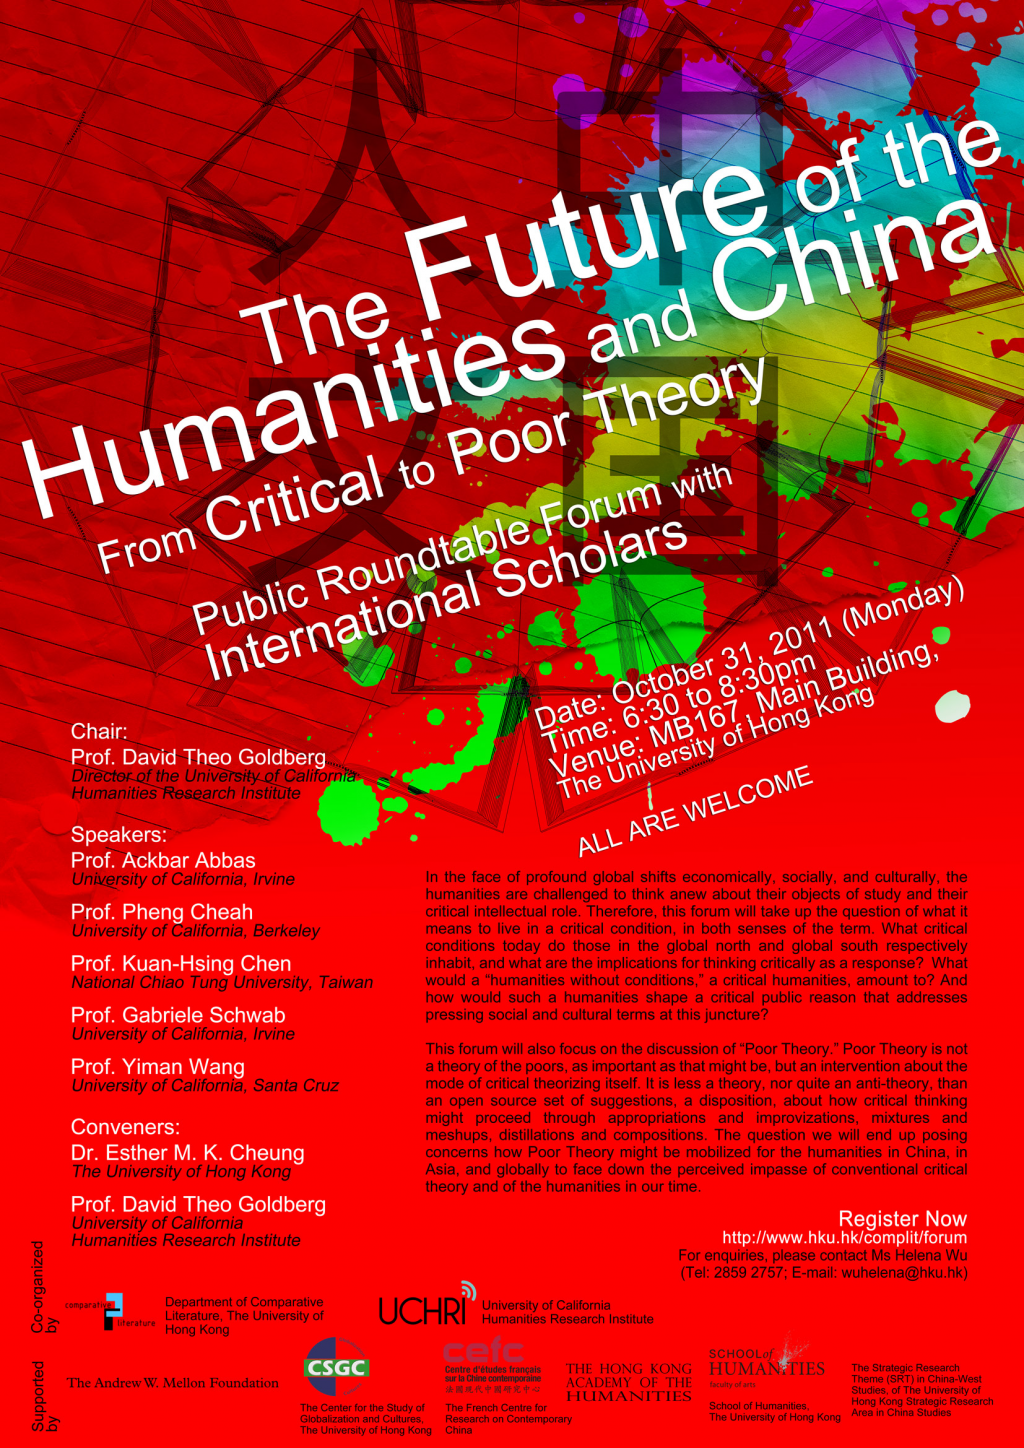 Public Roundtable Forum with International Scholars- “The Future of the Humanities and China: From Critical to Poor Theory”